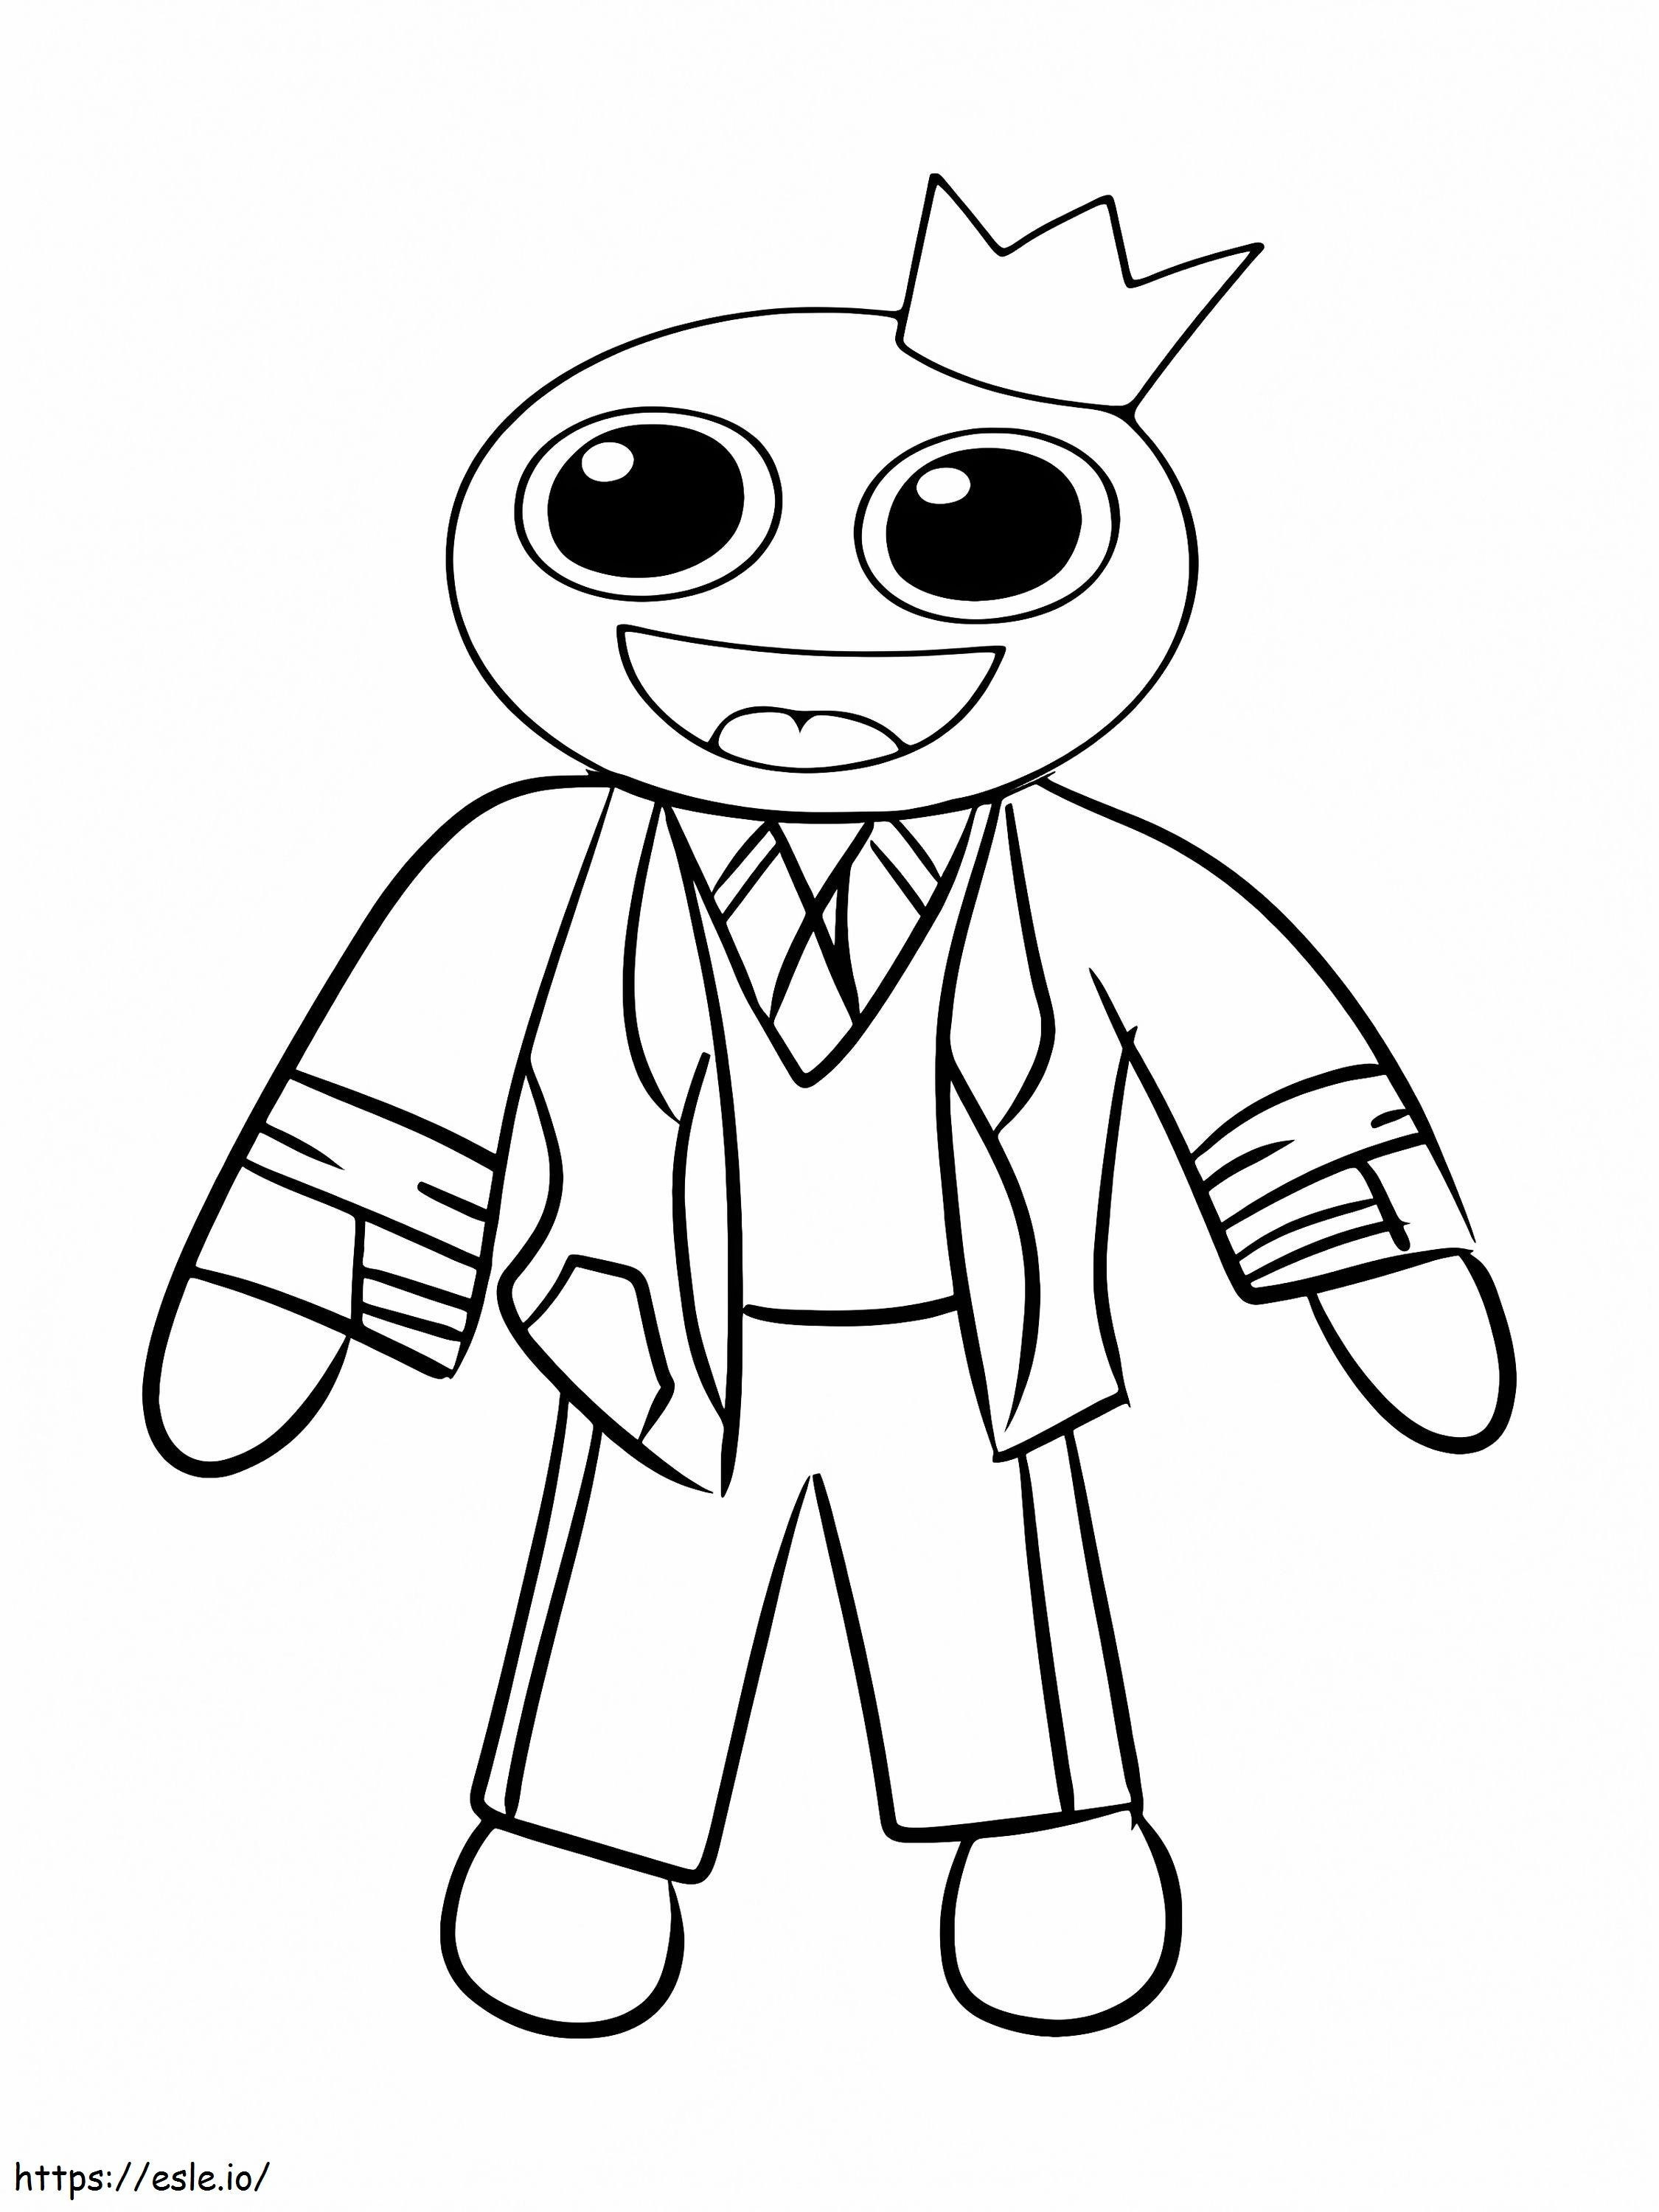 Formal Rainbow Friends Roblox coloring page